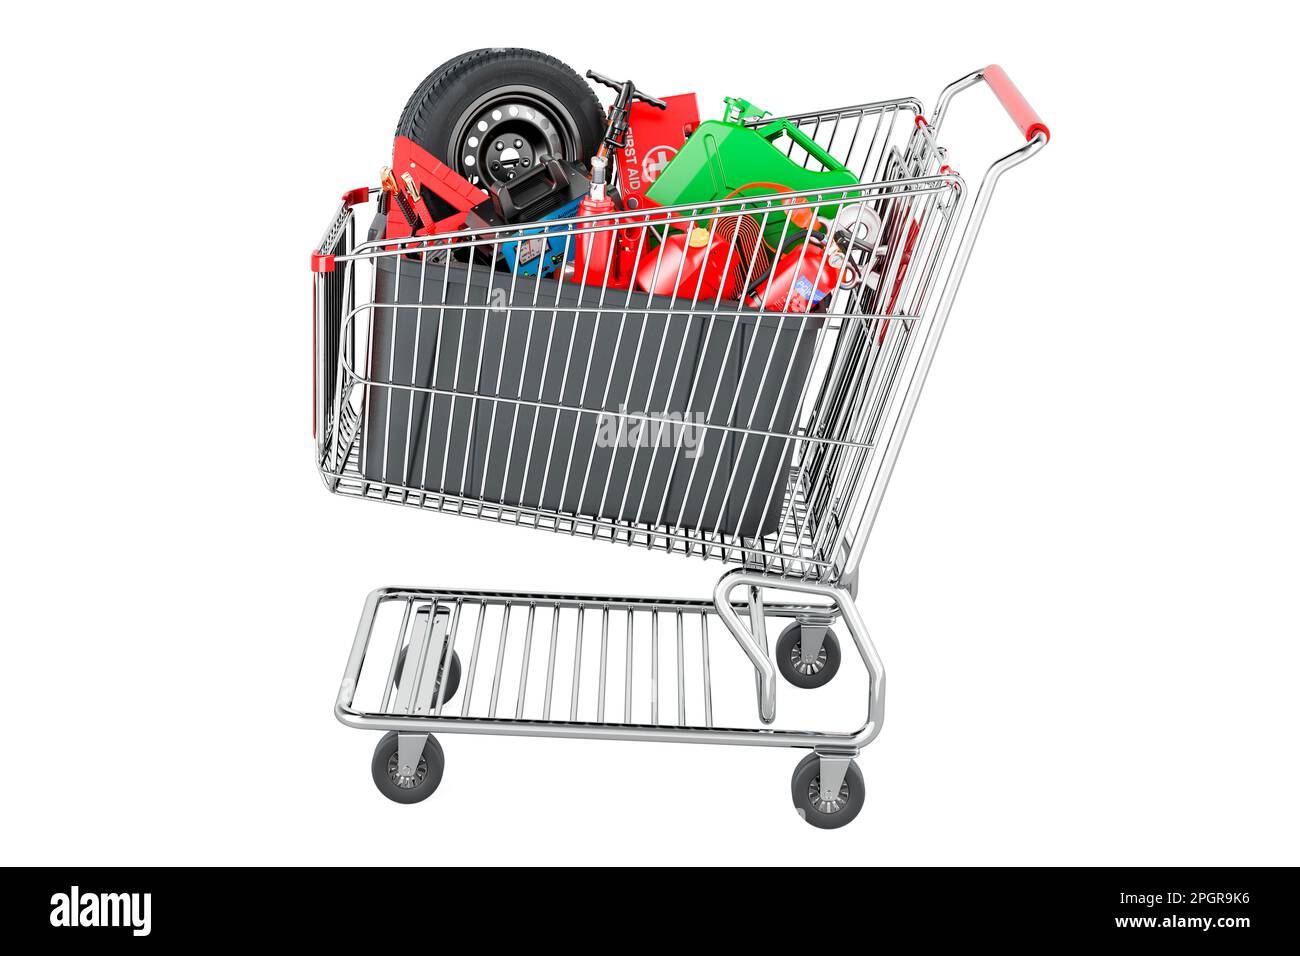 Plastic box full of car tools, equipment and accessories inside shopping cart, 3D rendering isolated on white background Stock Photo